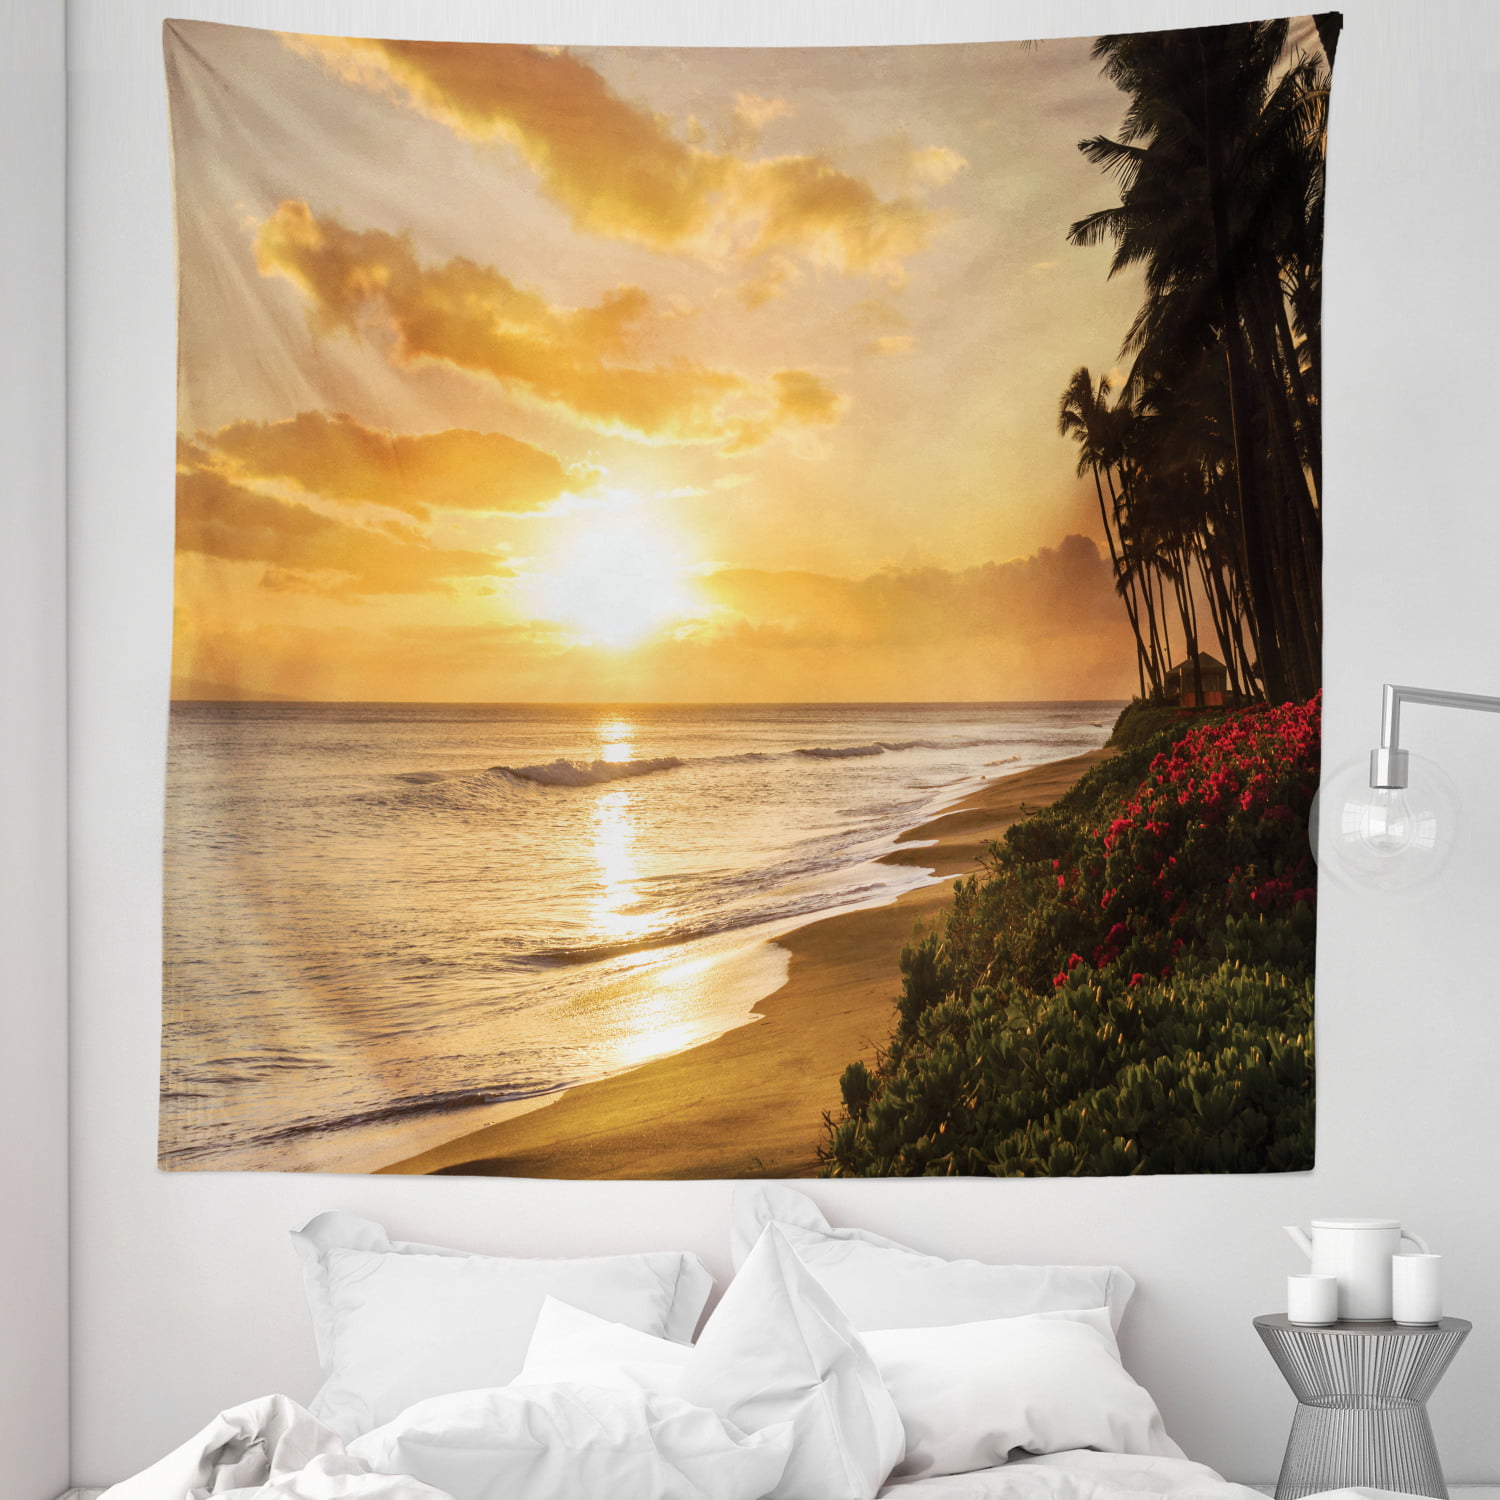 Kaanapali Giclee Living room Bedroom Prints Hawaii Print Wall art Poster Artwork Photo Picture Photography